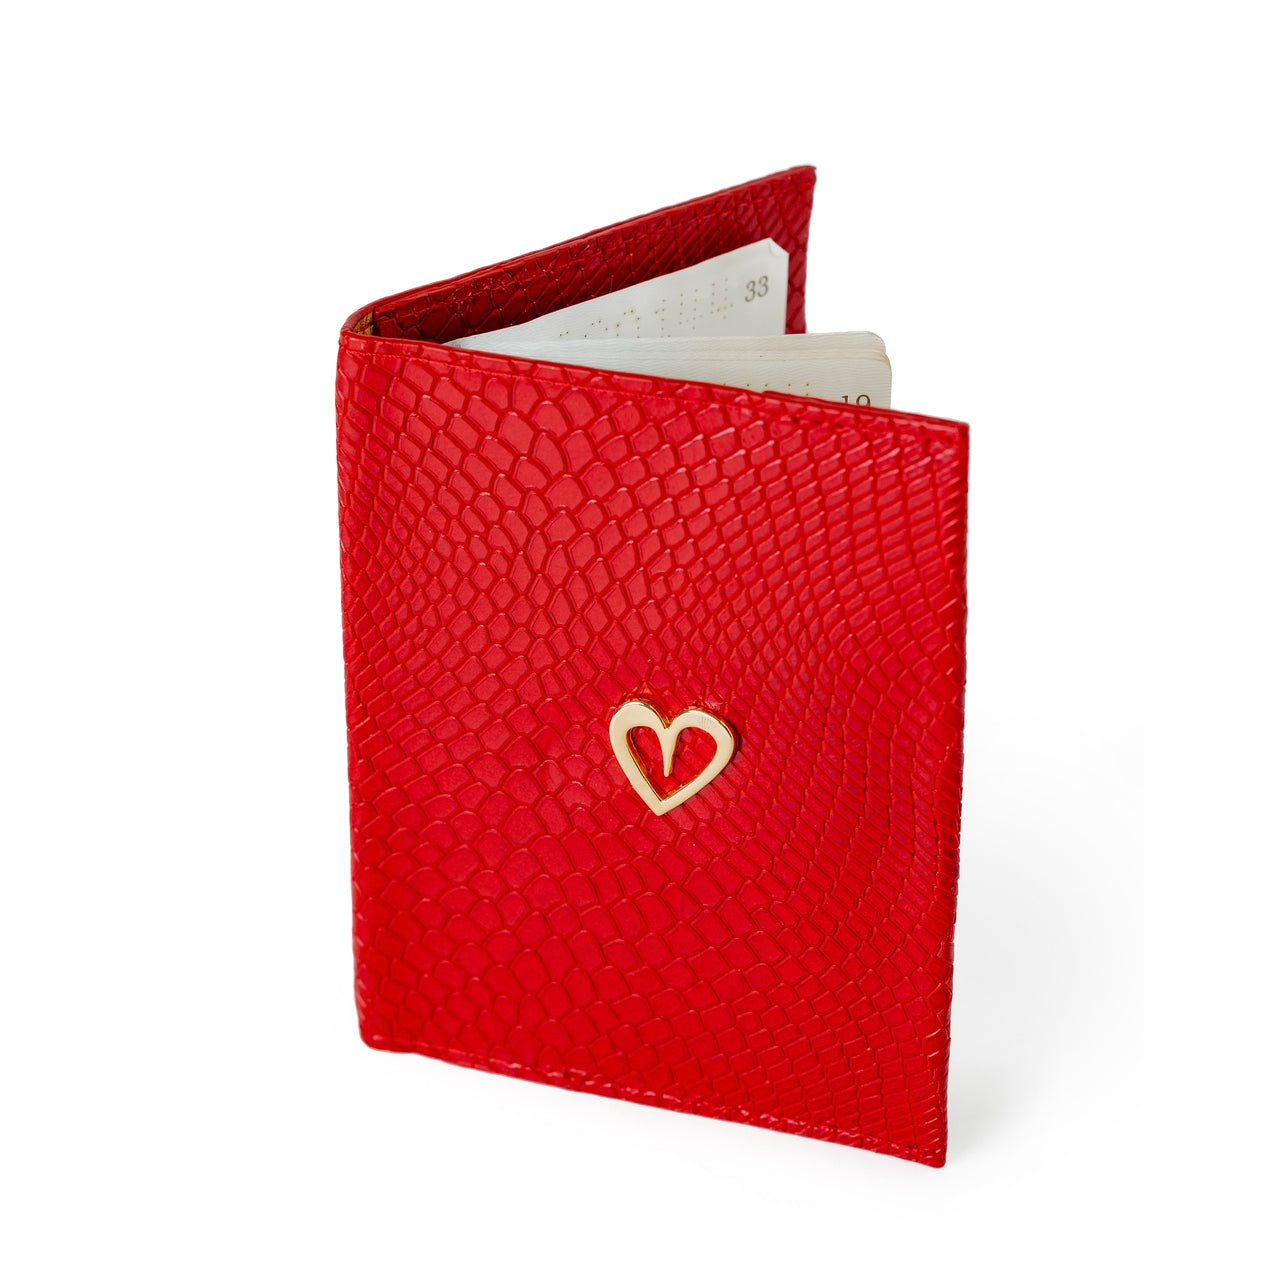 Passport Holder by Nataly Mendez Details  Genuine Leather Two cards slot Gold Heart